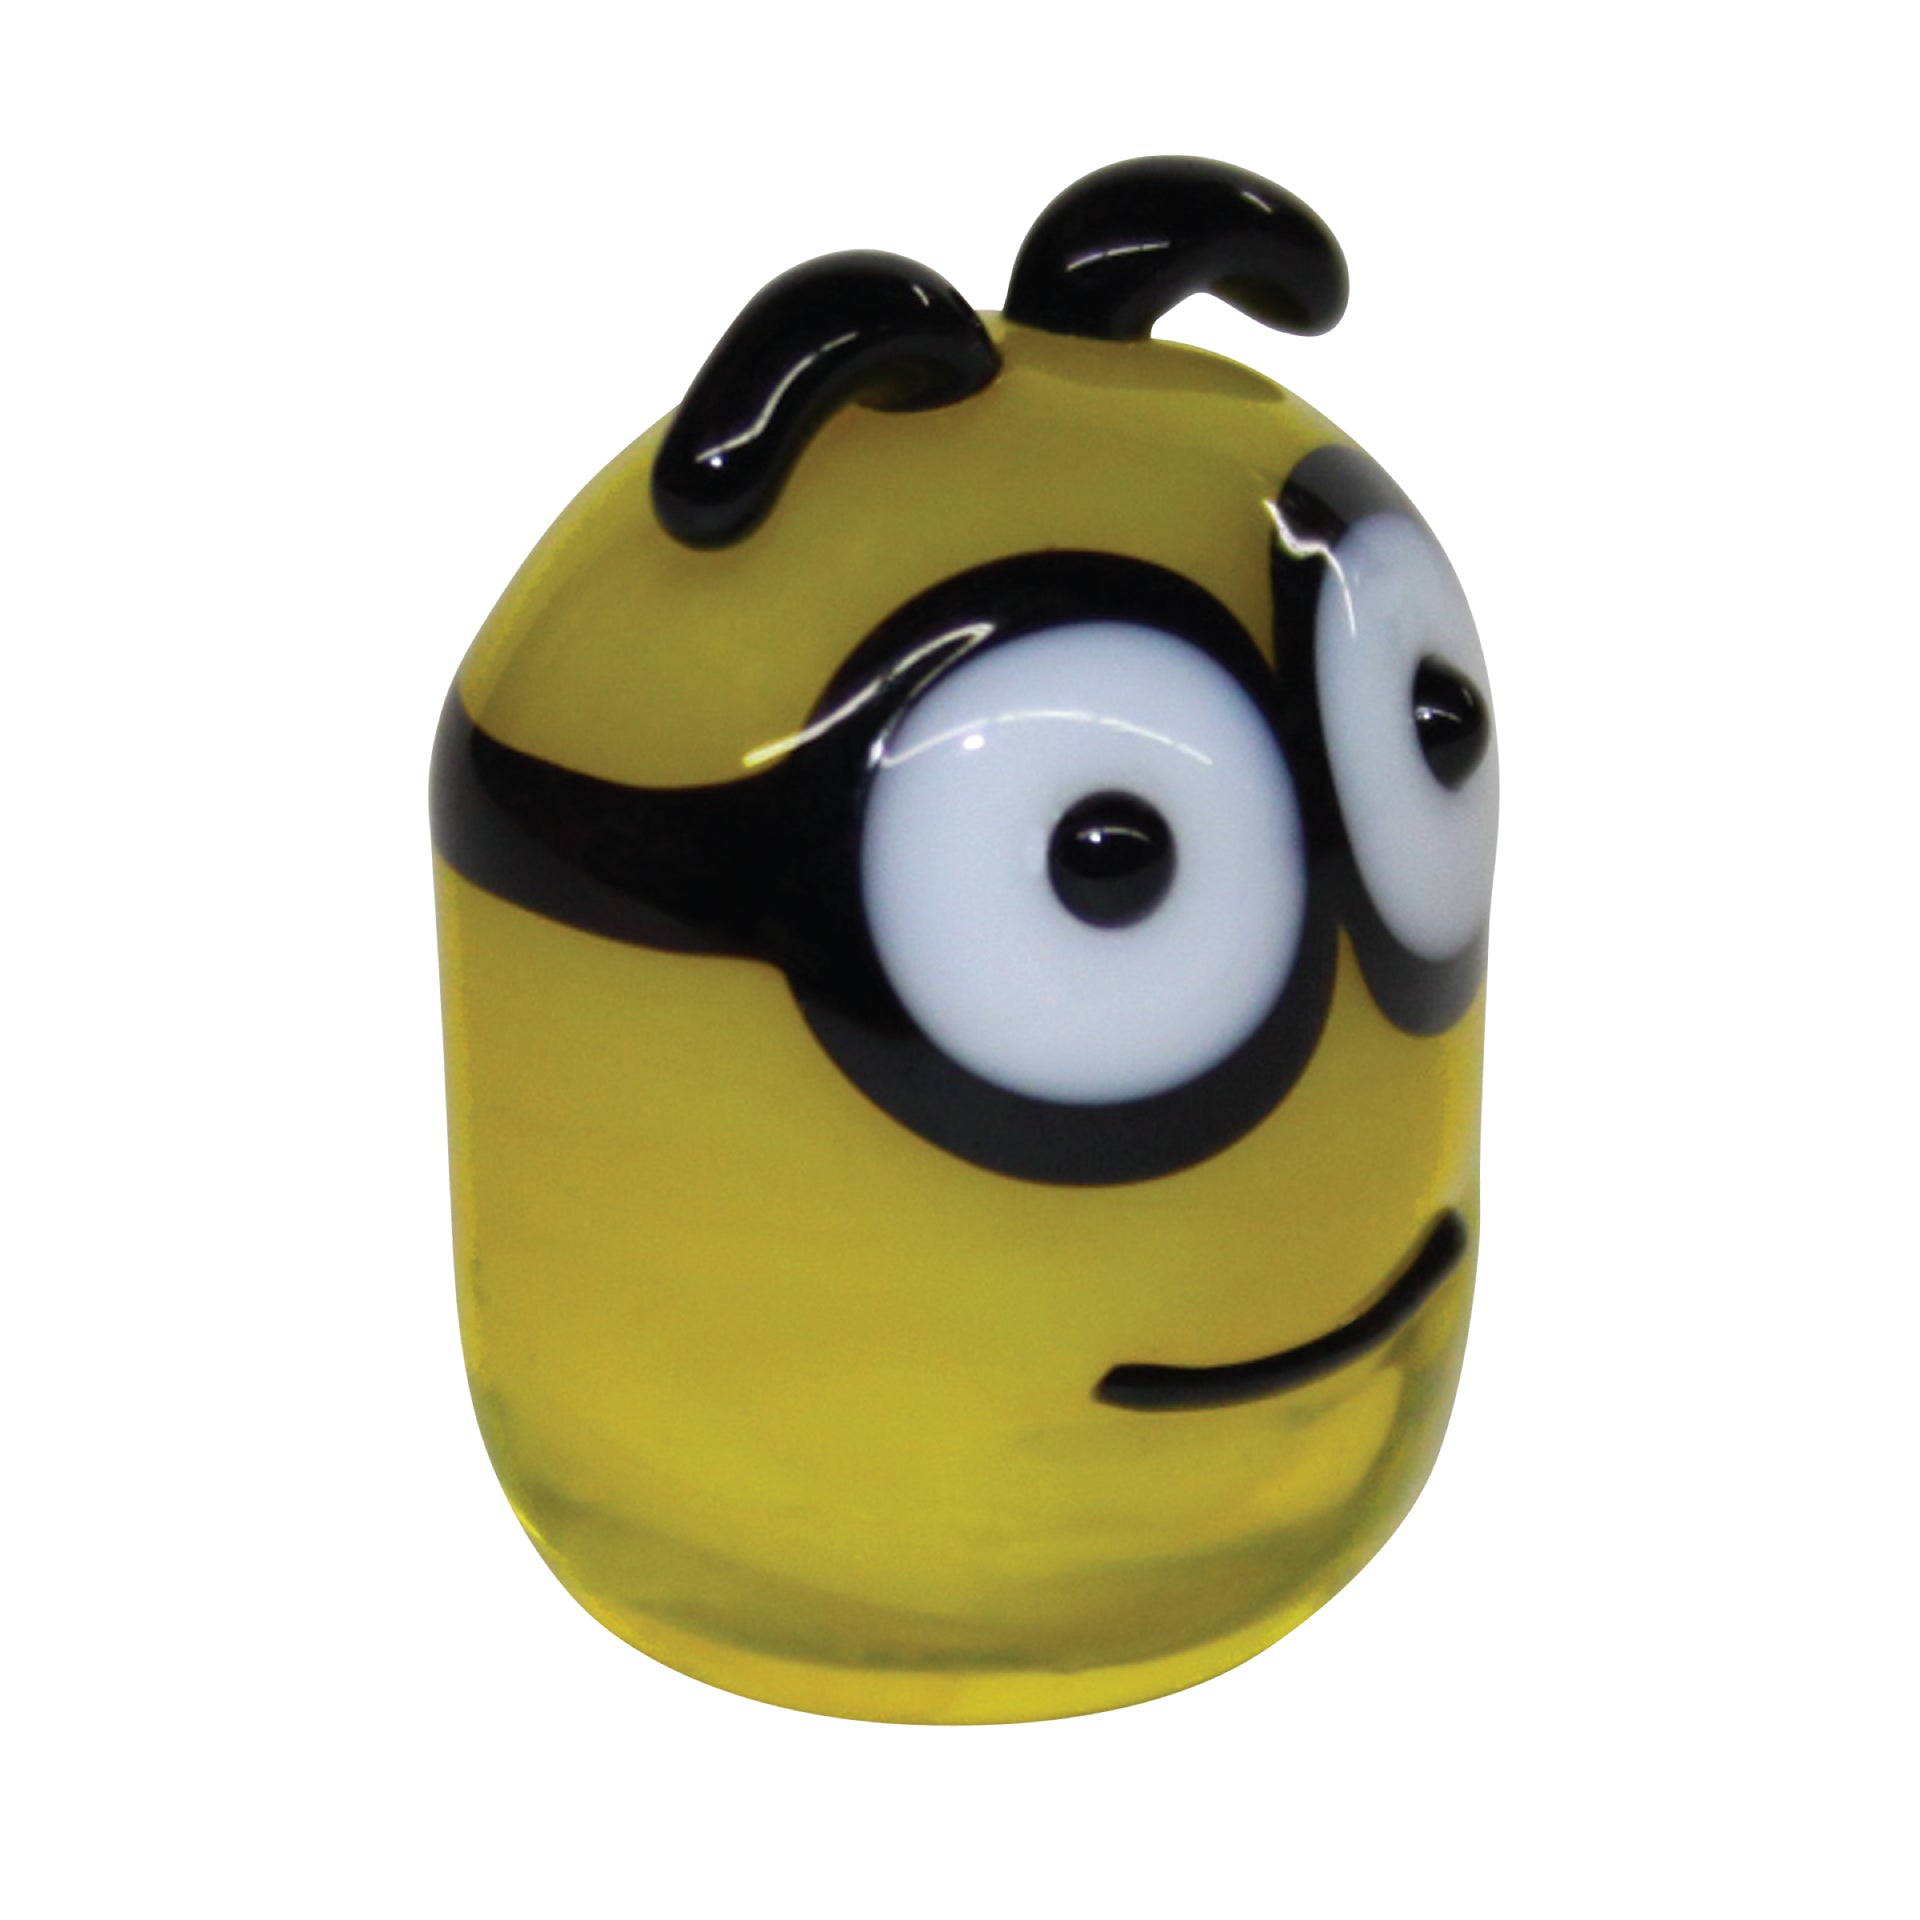 GlassWorld Despicable Me 2 Dave collectible miniature glass figurine Product Image